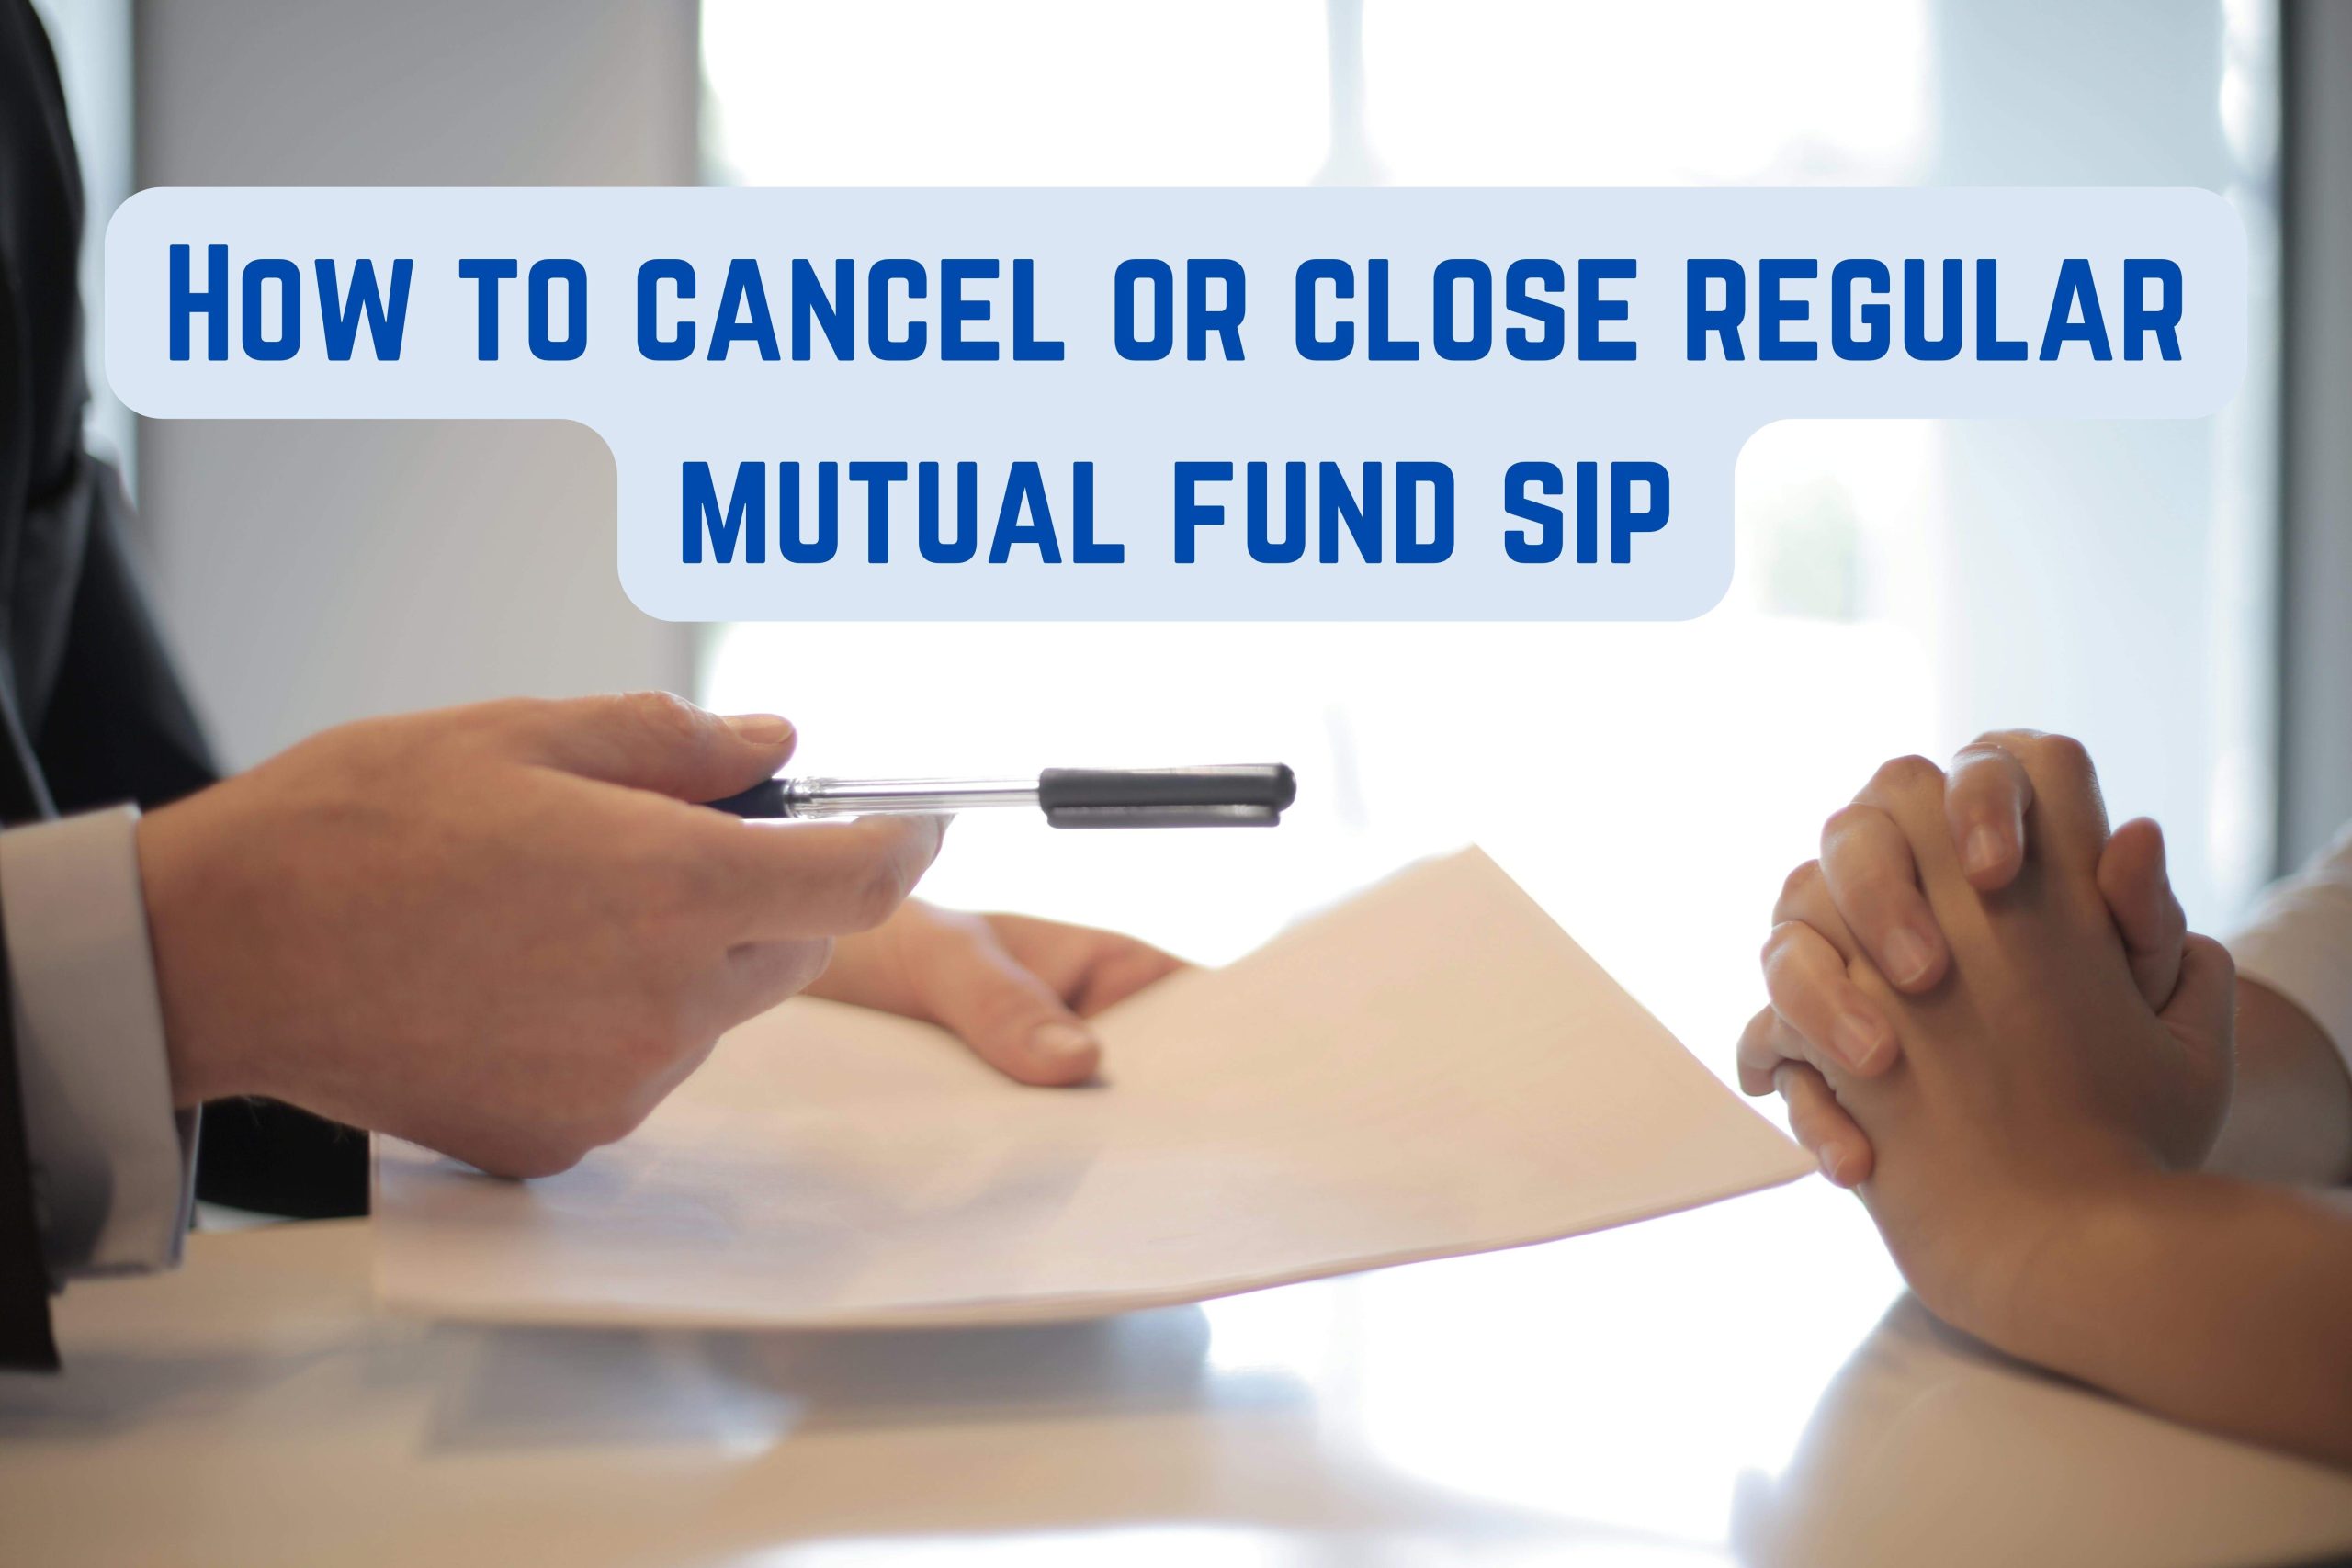 How to cancel or close regular mutual fund SIP